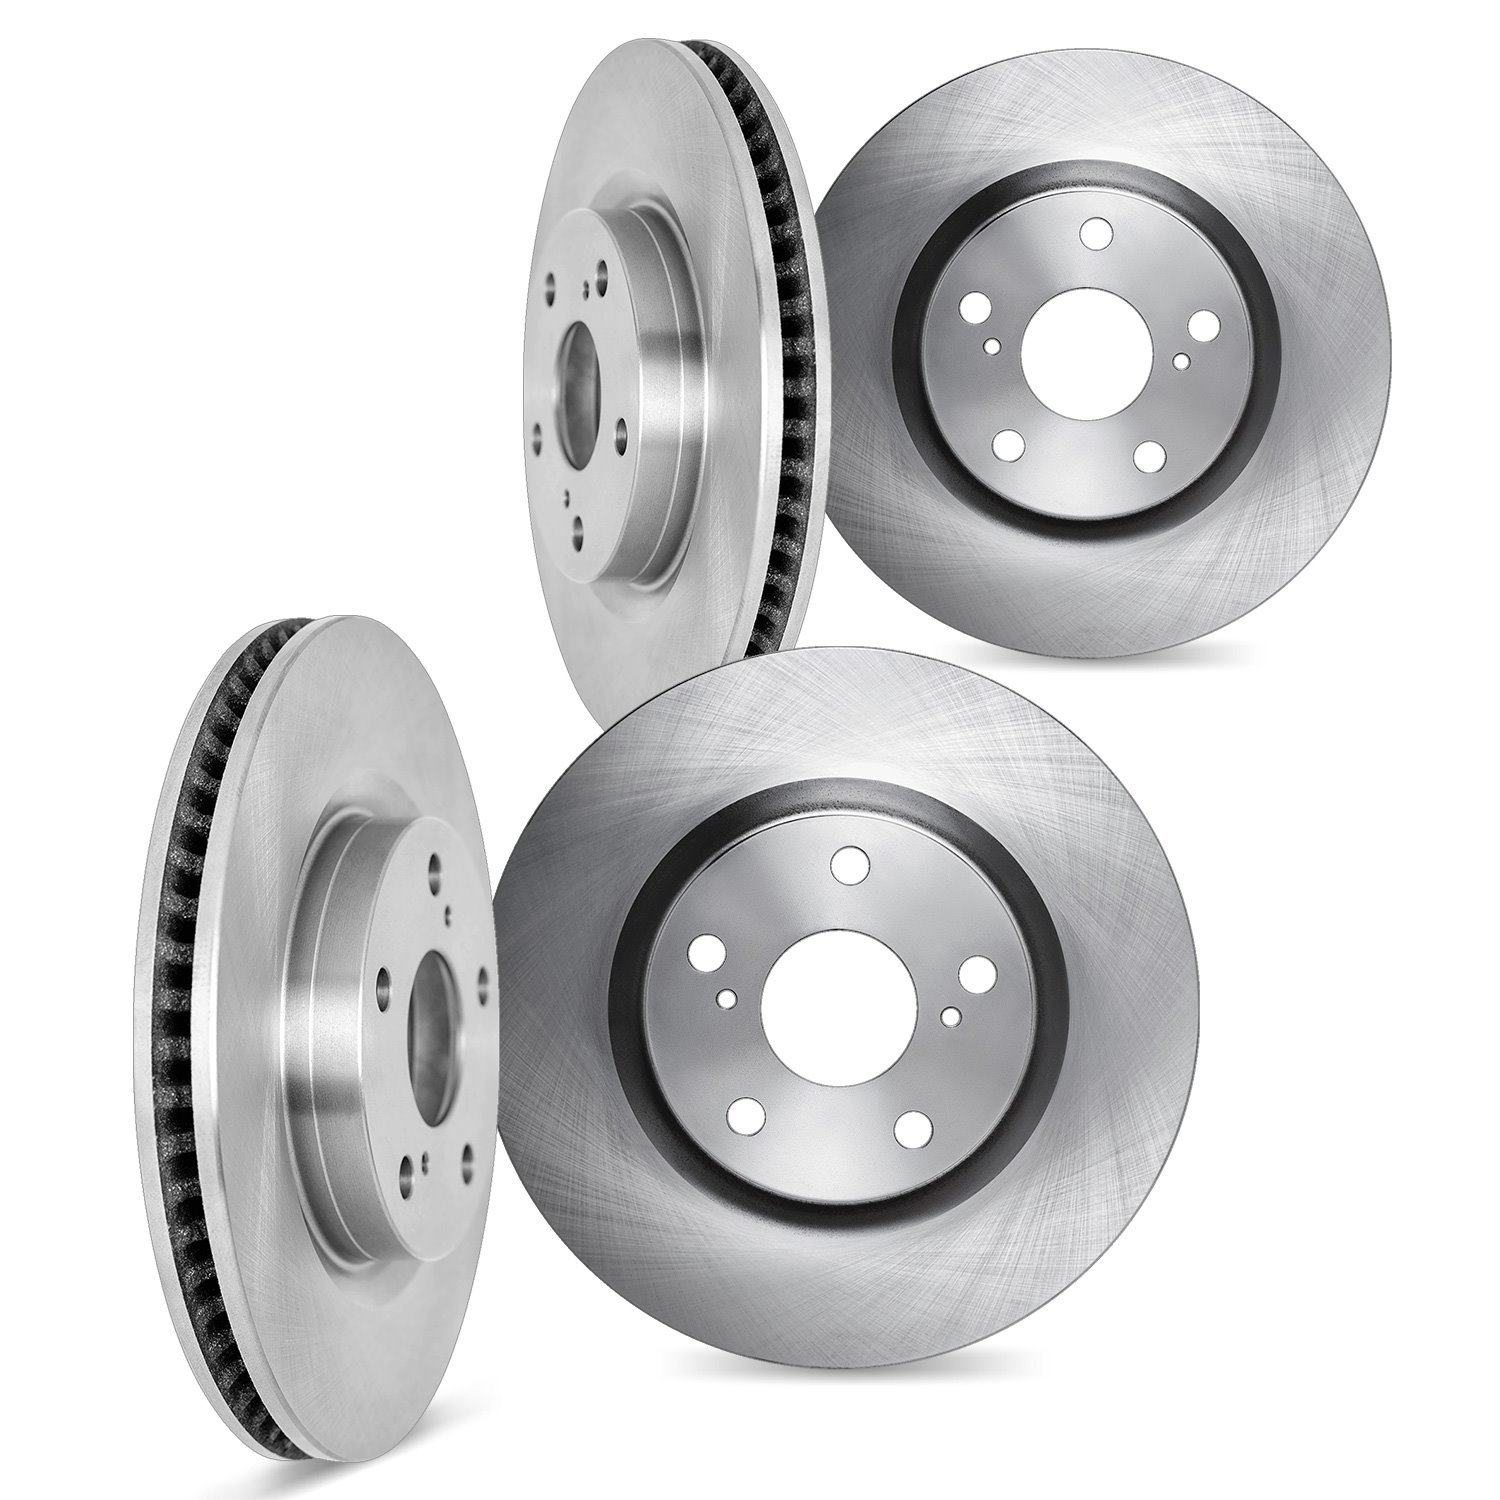 6004-31087 Brake Rotors, Fits Select Multiple Makes/Models, Position: Front and Rear